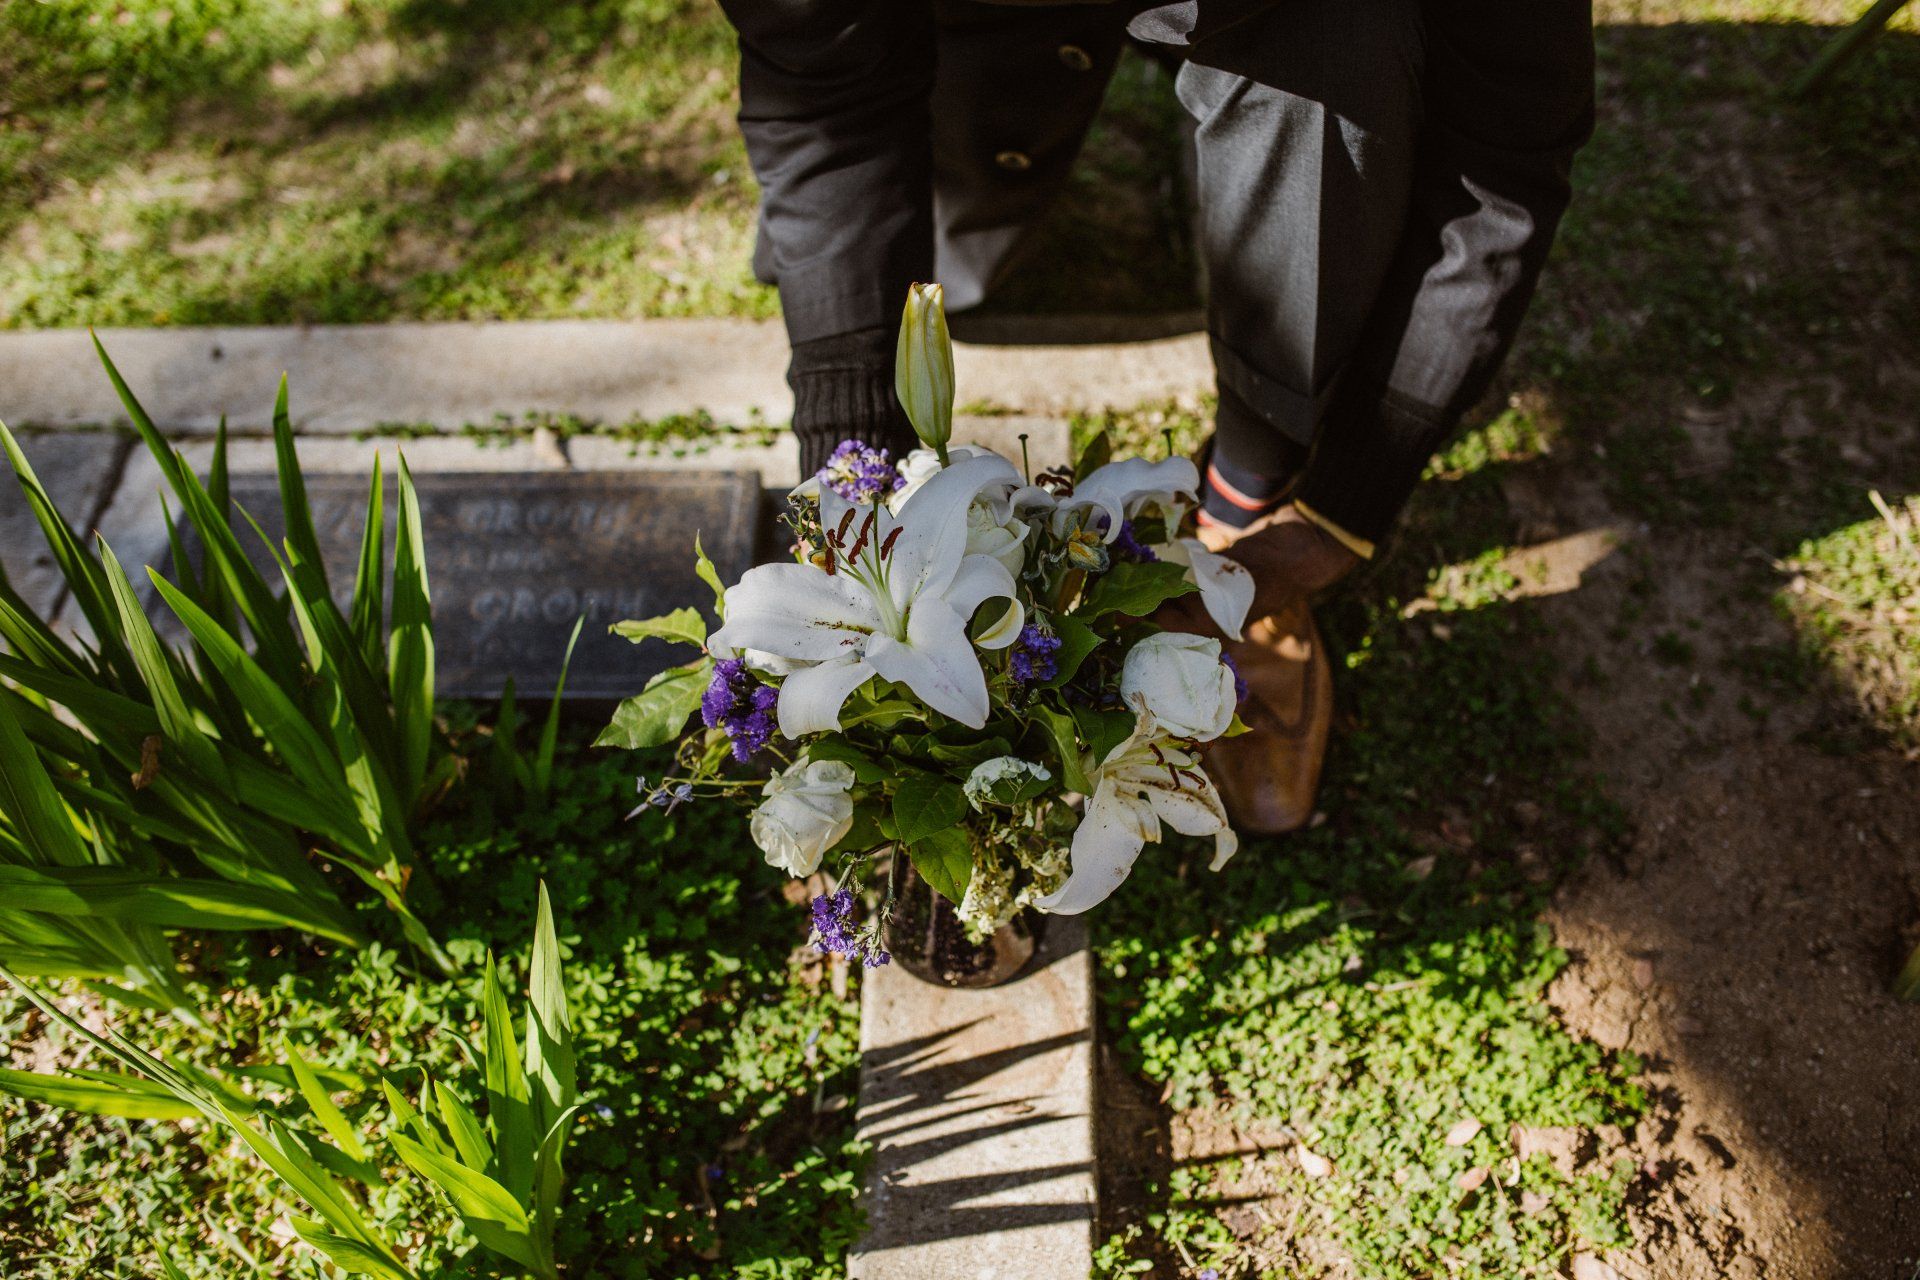 A person is putting flowers on a grave in a cemetery.